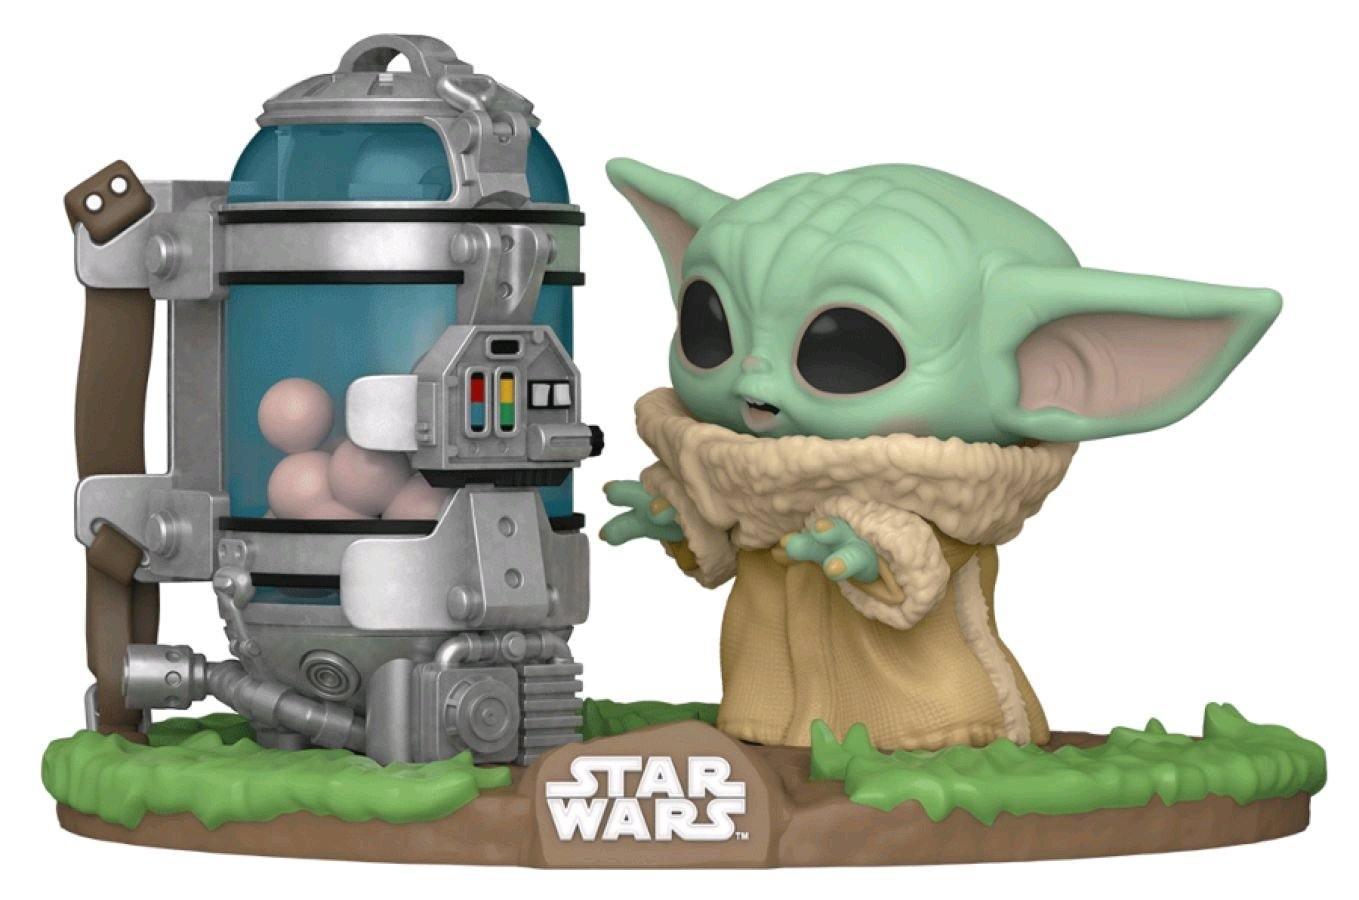 FUN50962 Star Wars: The Mandalorian - Child with Egg Canister Pop! Deluxe - Funko - Titan Pop Culture